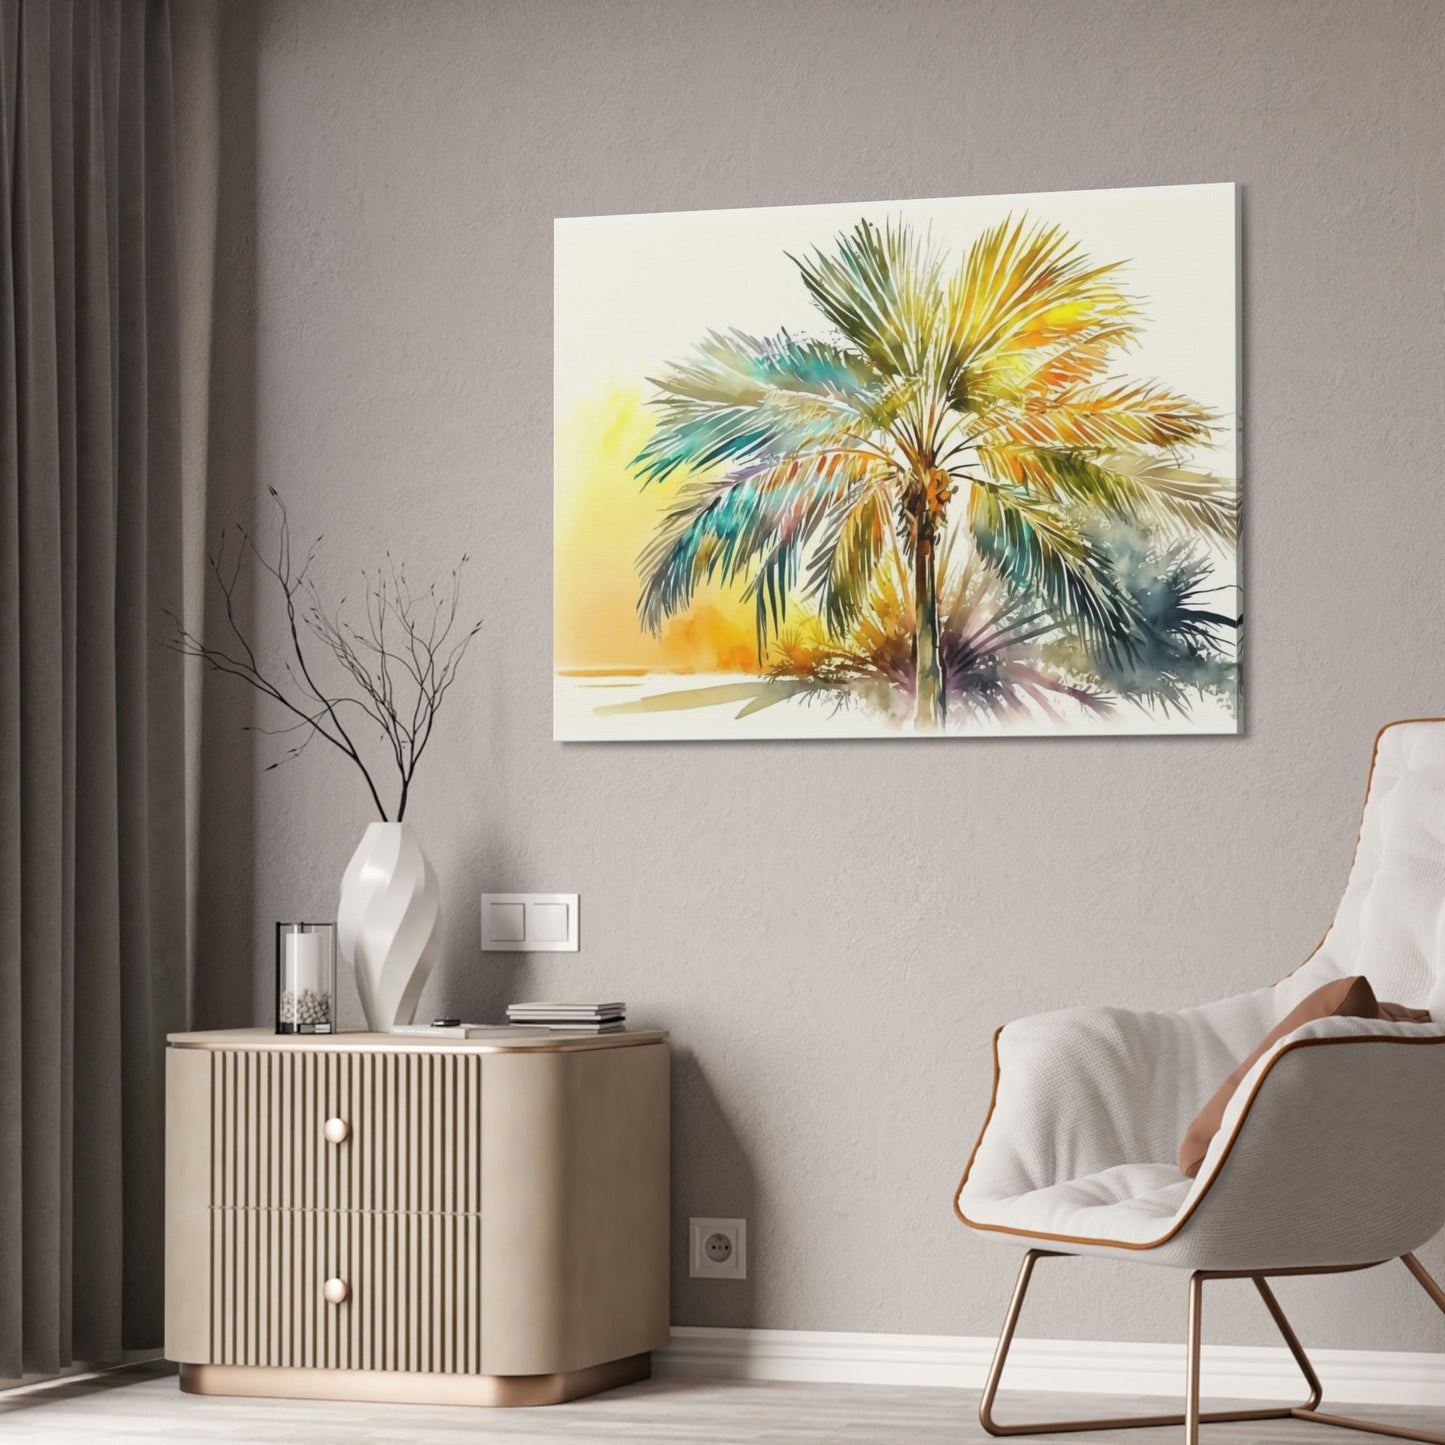 Framed Canvas Print of Palm Trees: Bringing the Tropics Indoors